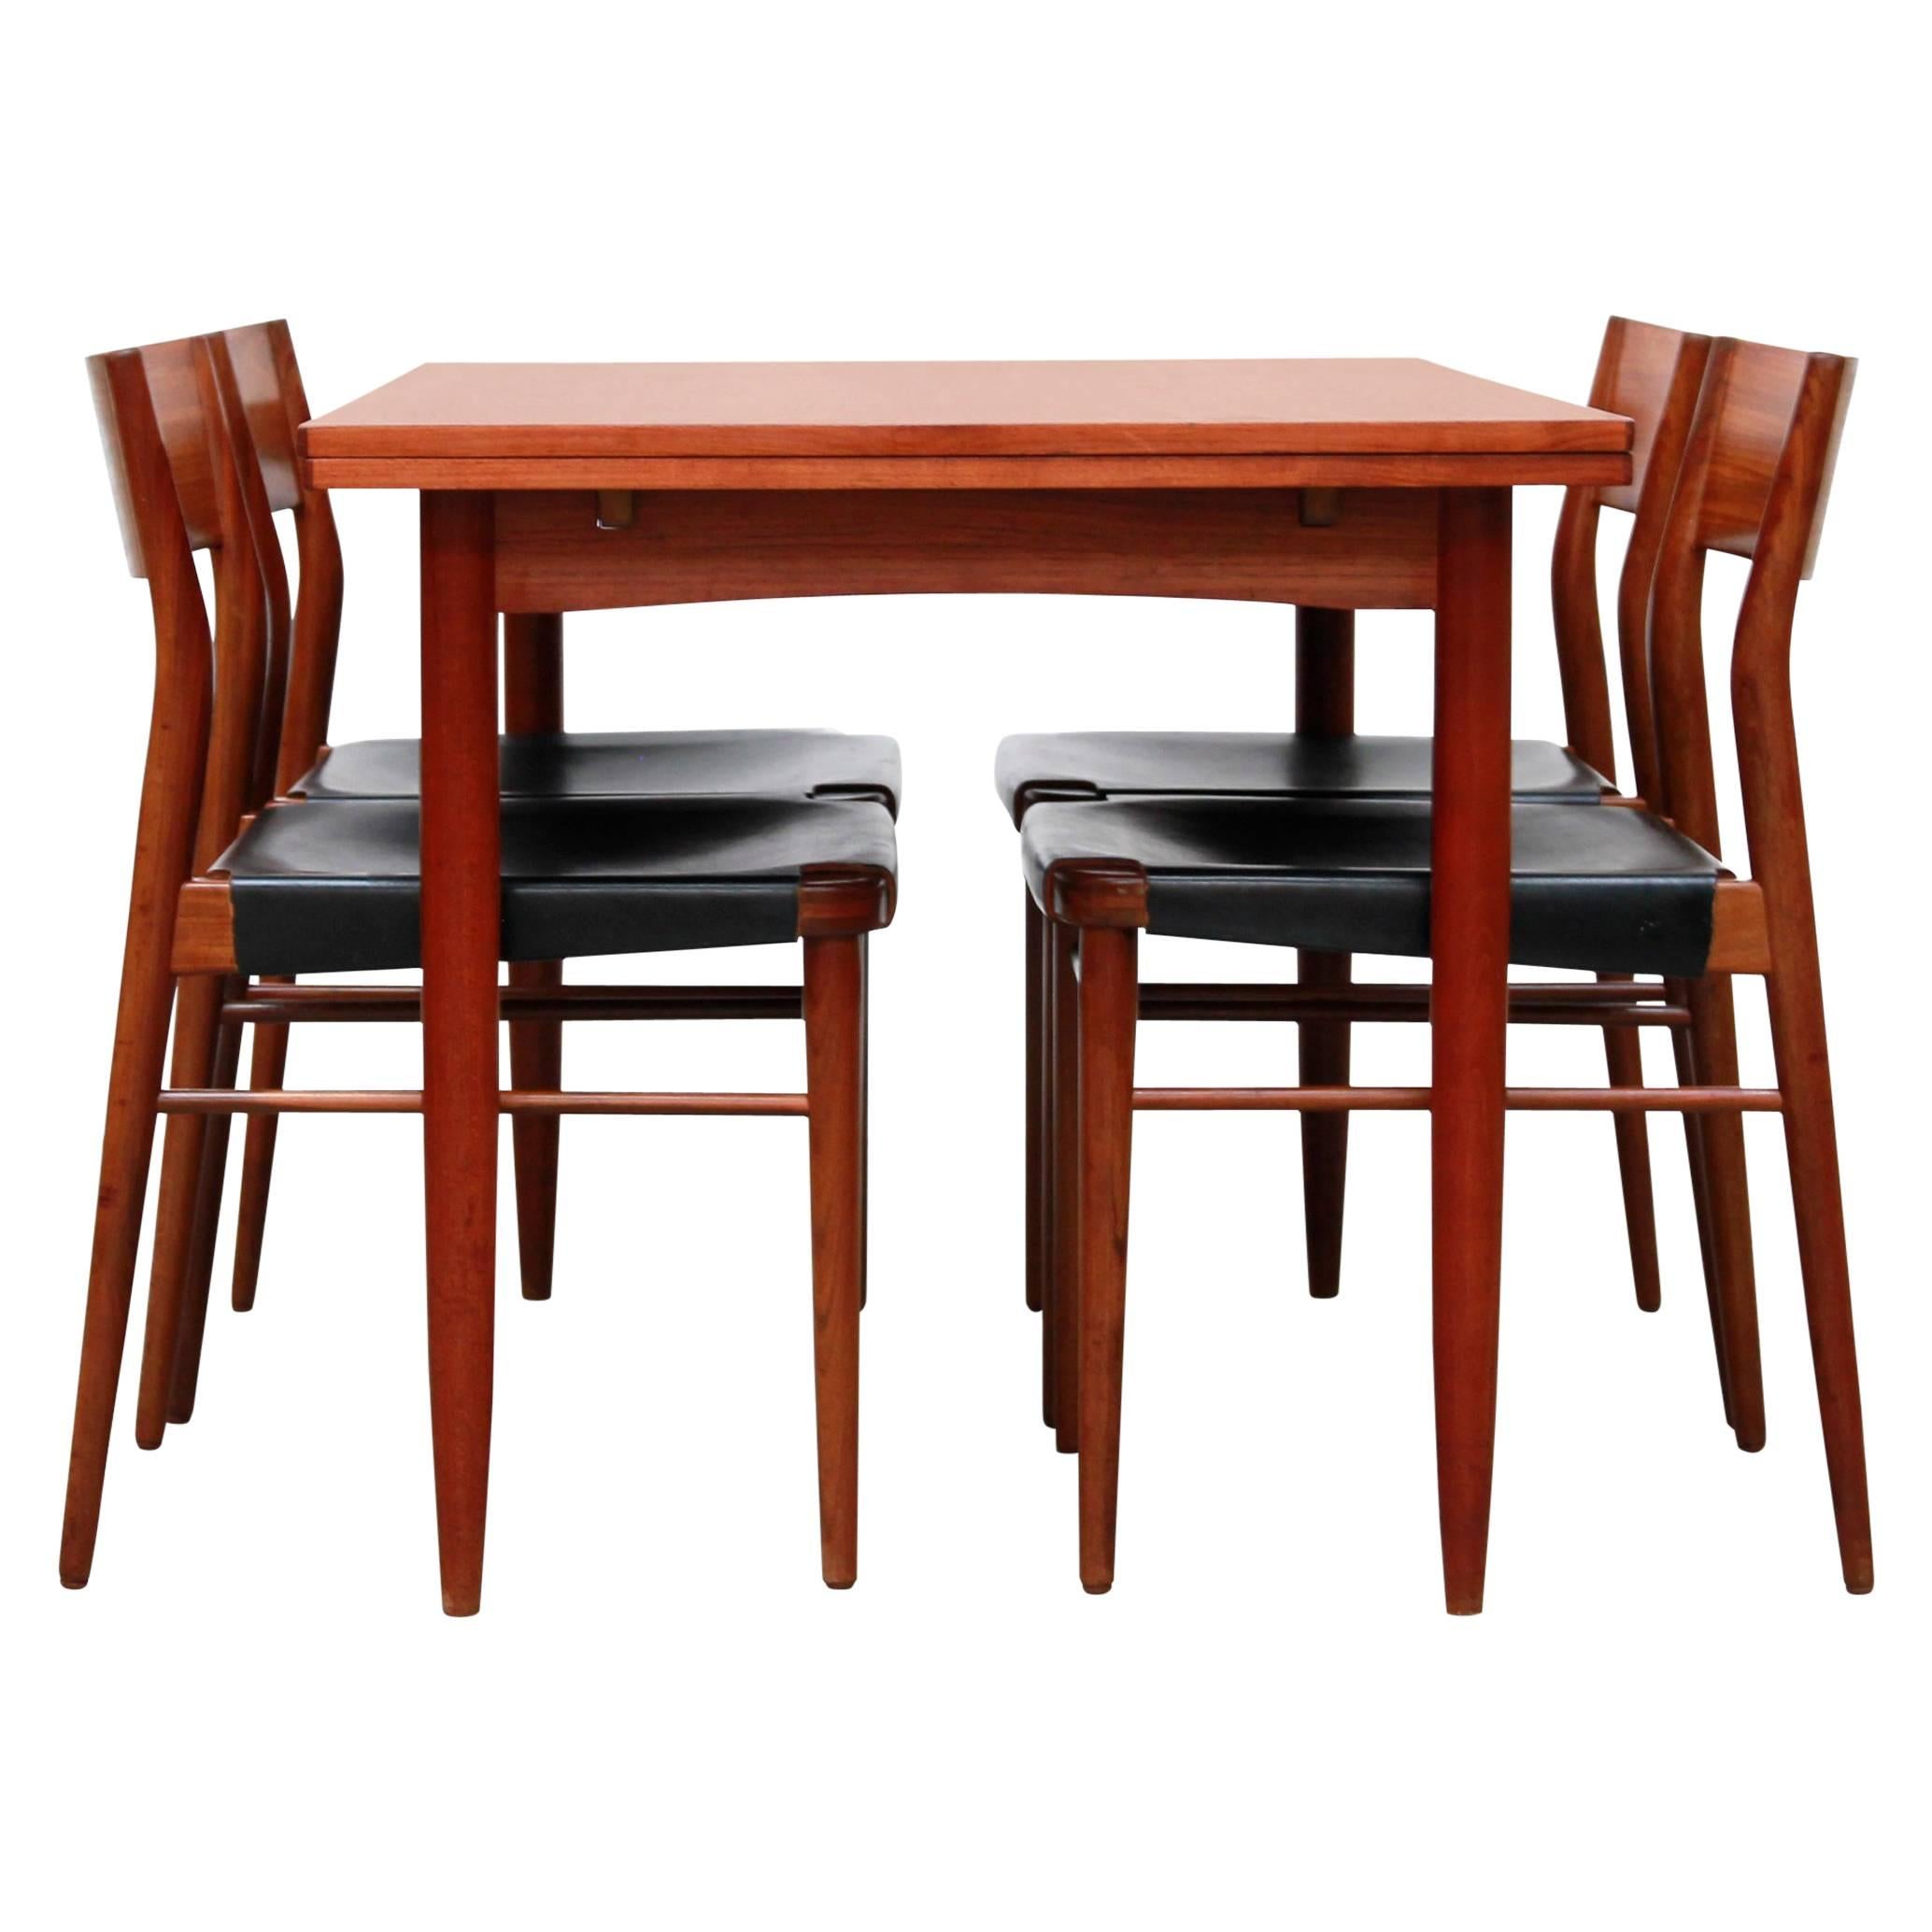 Wilkhahn Model 351 Dining Chairs and Table in Teak and Leather by Georg Leowald